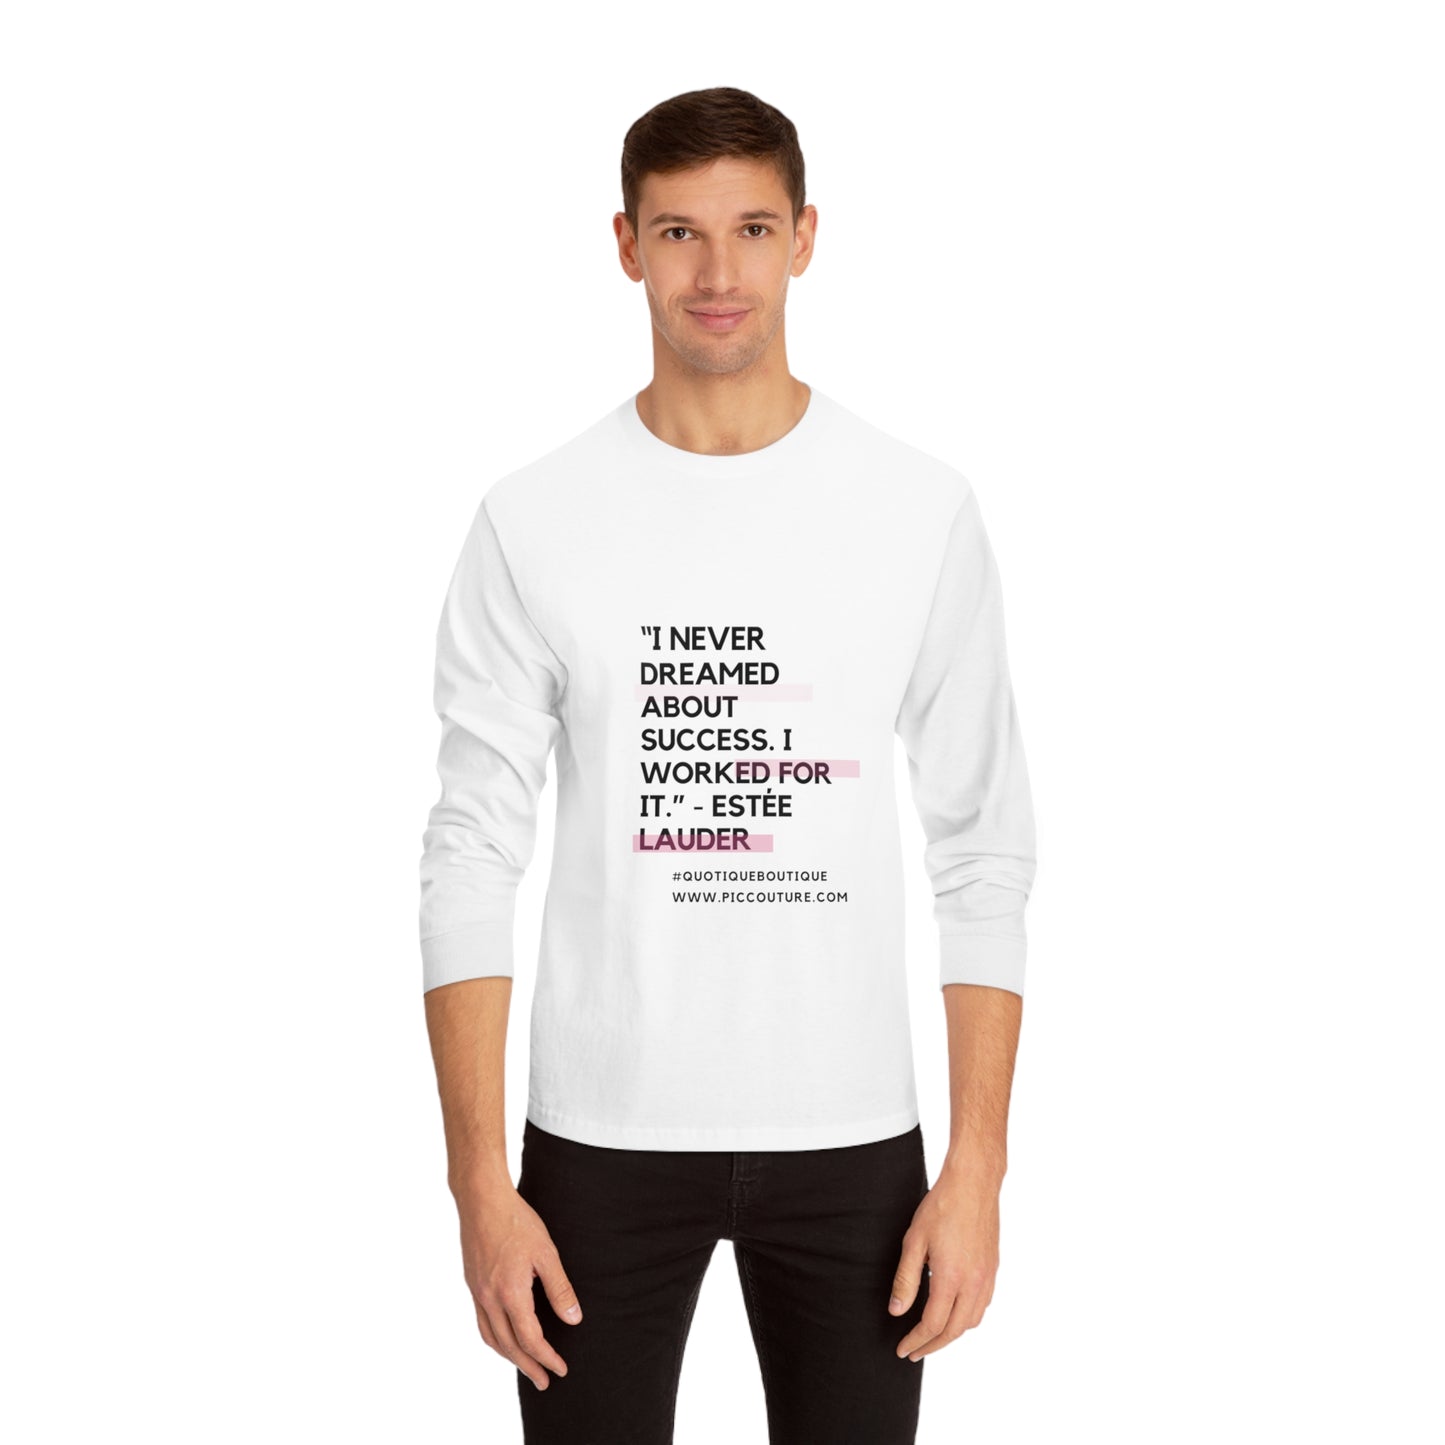 I worked for it- Long Sleeve T-Shirt